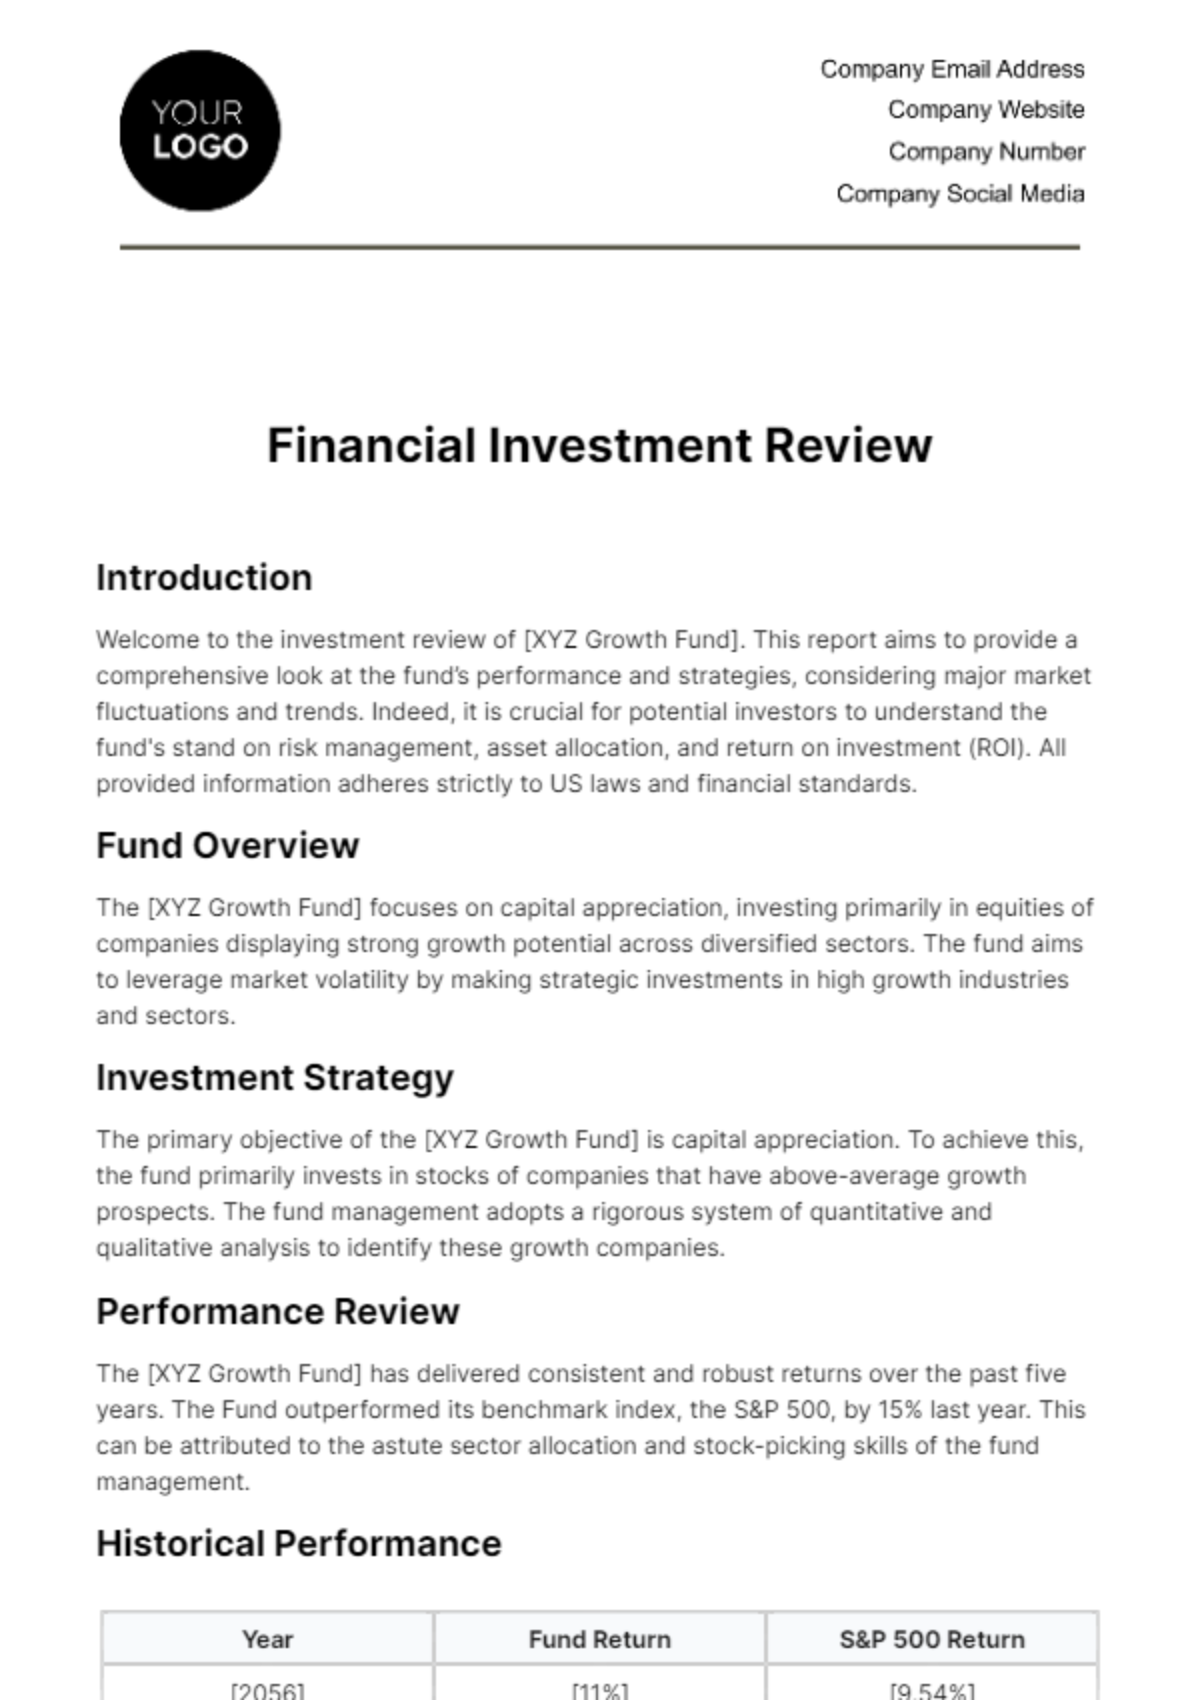 Financial Investment Review Template